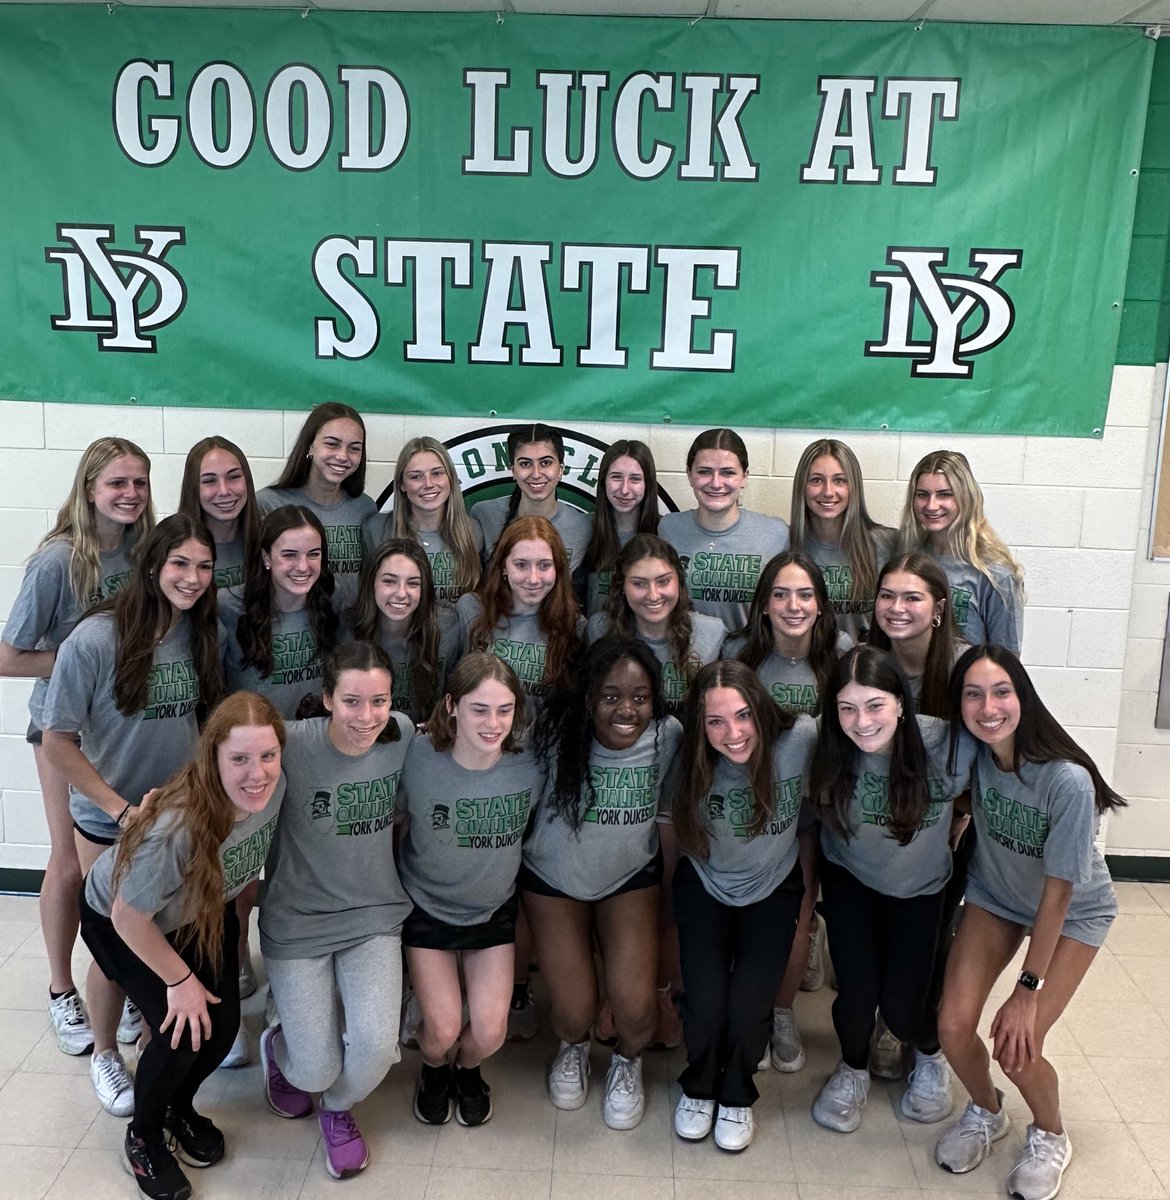 Girls’ Track and Field State Send Off Good luck at State DUKES!